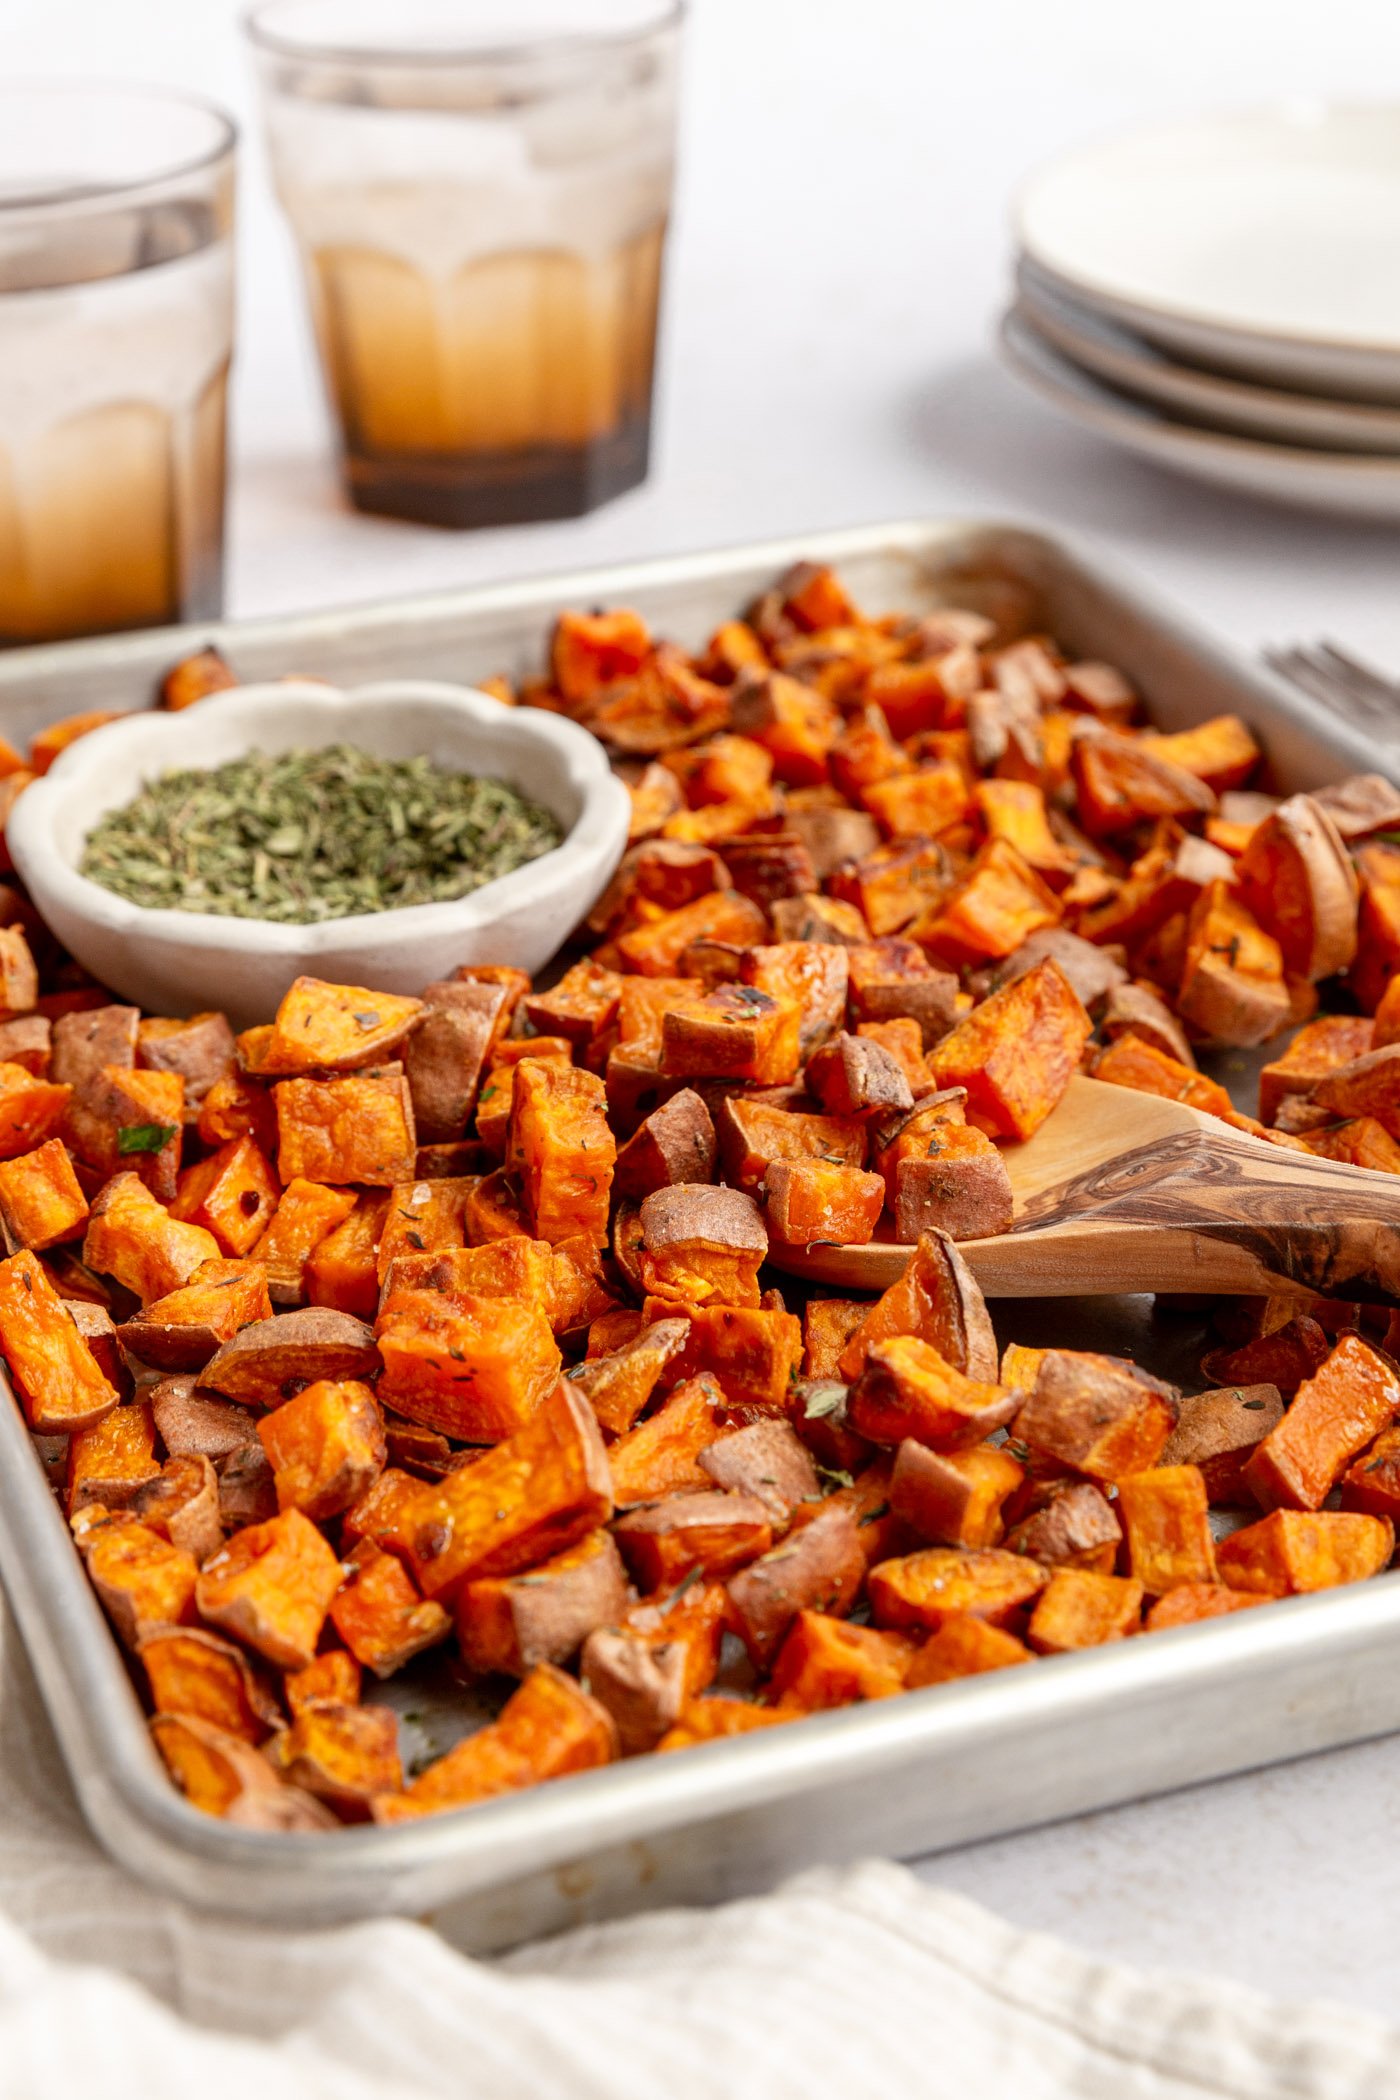 A sheet pan filled with roasted diced sweet potatoes and a small white bowl of dried herbs. A wooden spoon is taking a helping of the sweet potatoes. The sheet pan is surrounded by a napkin, two drinking glasses, and a stack of 3 white plates.